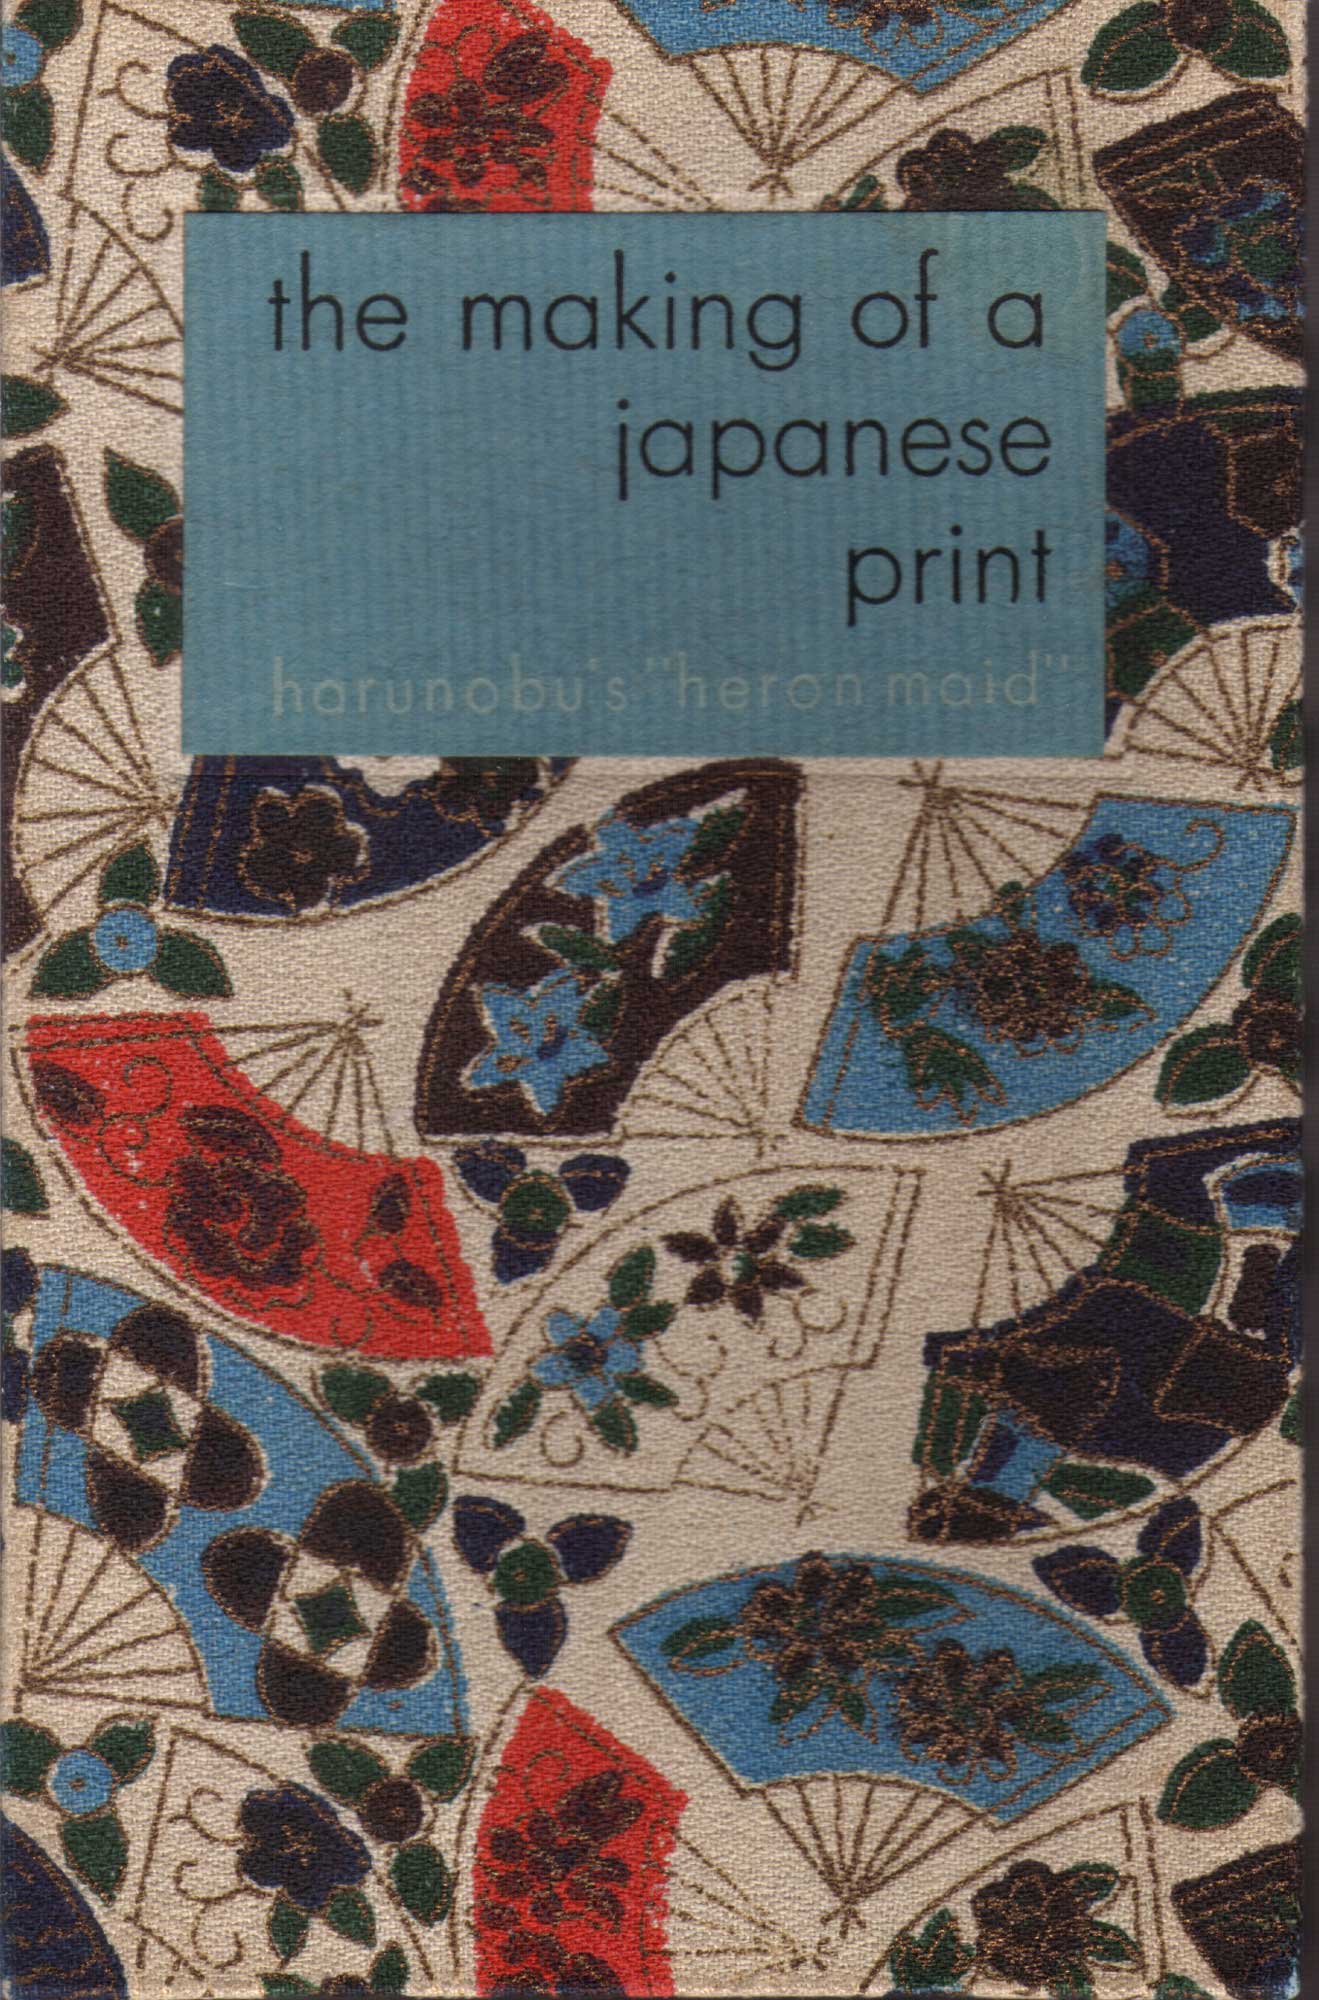 The Making of a Japanese Print